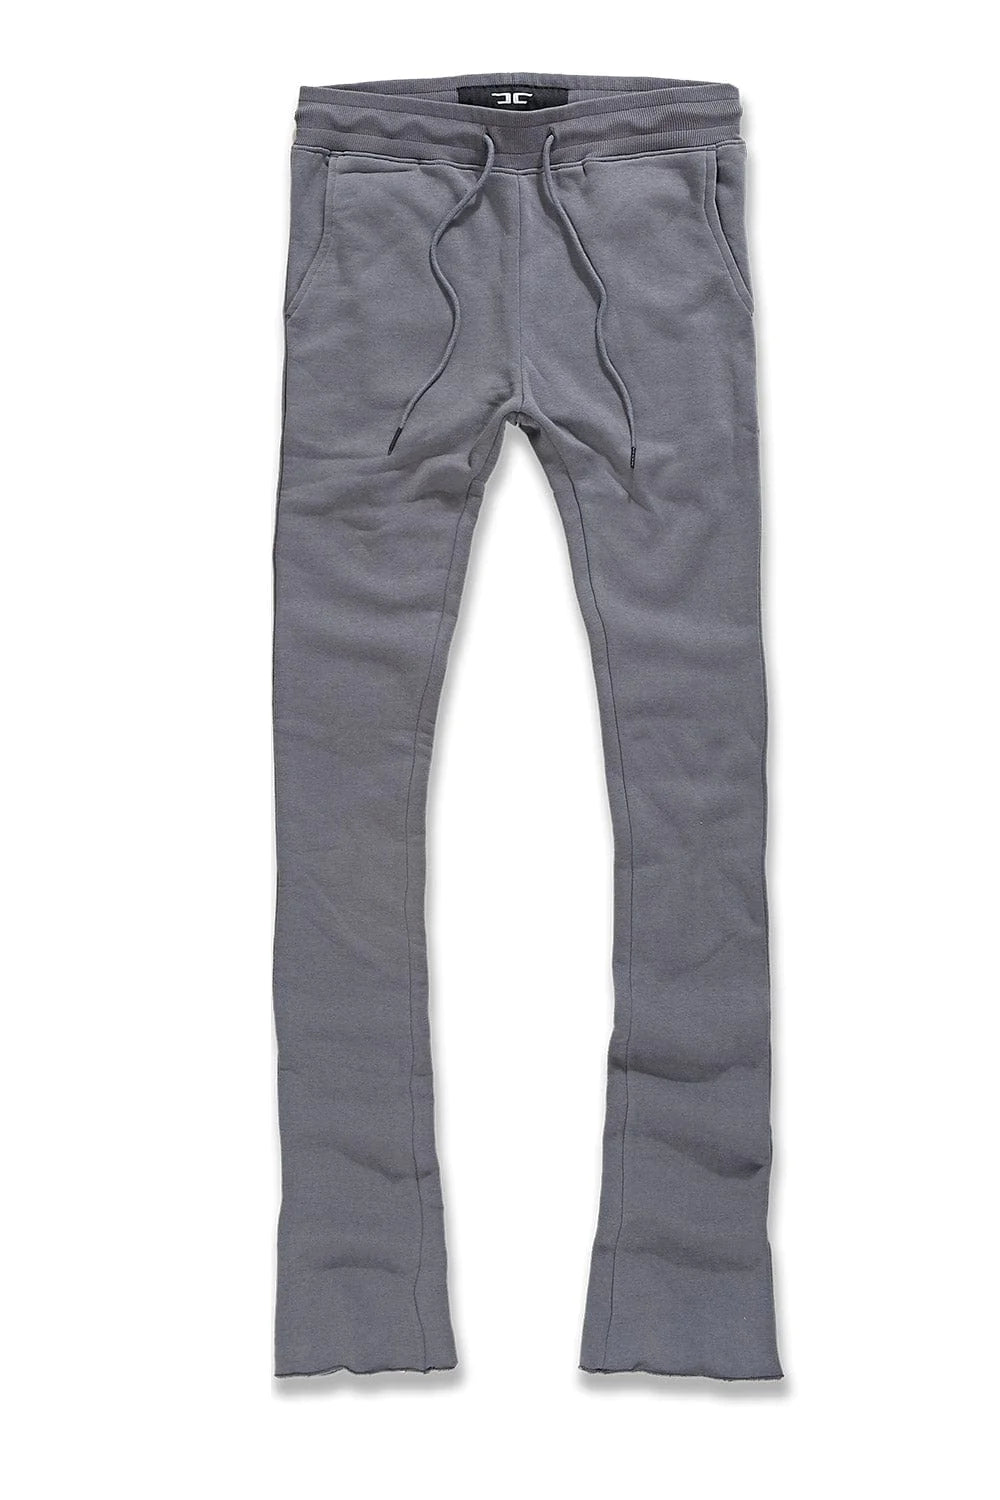 Uptown Stacked Sweatpants - Charcoal